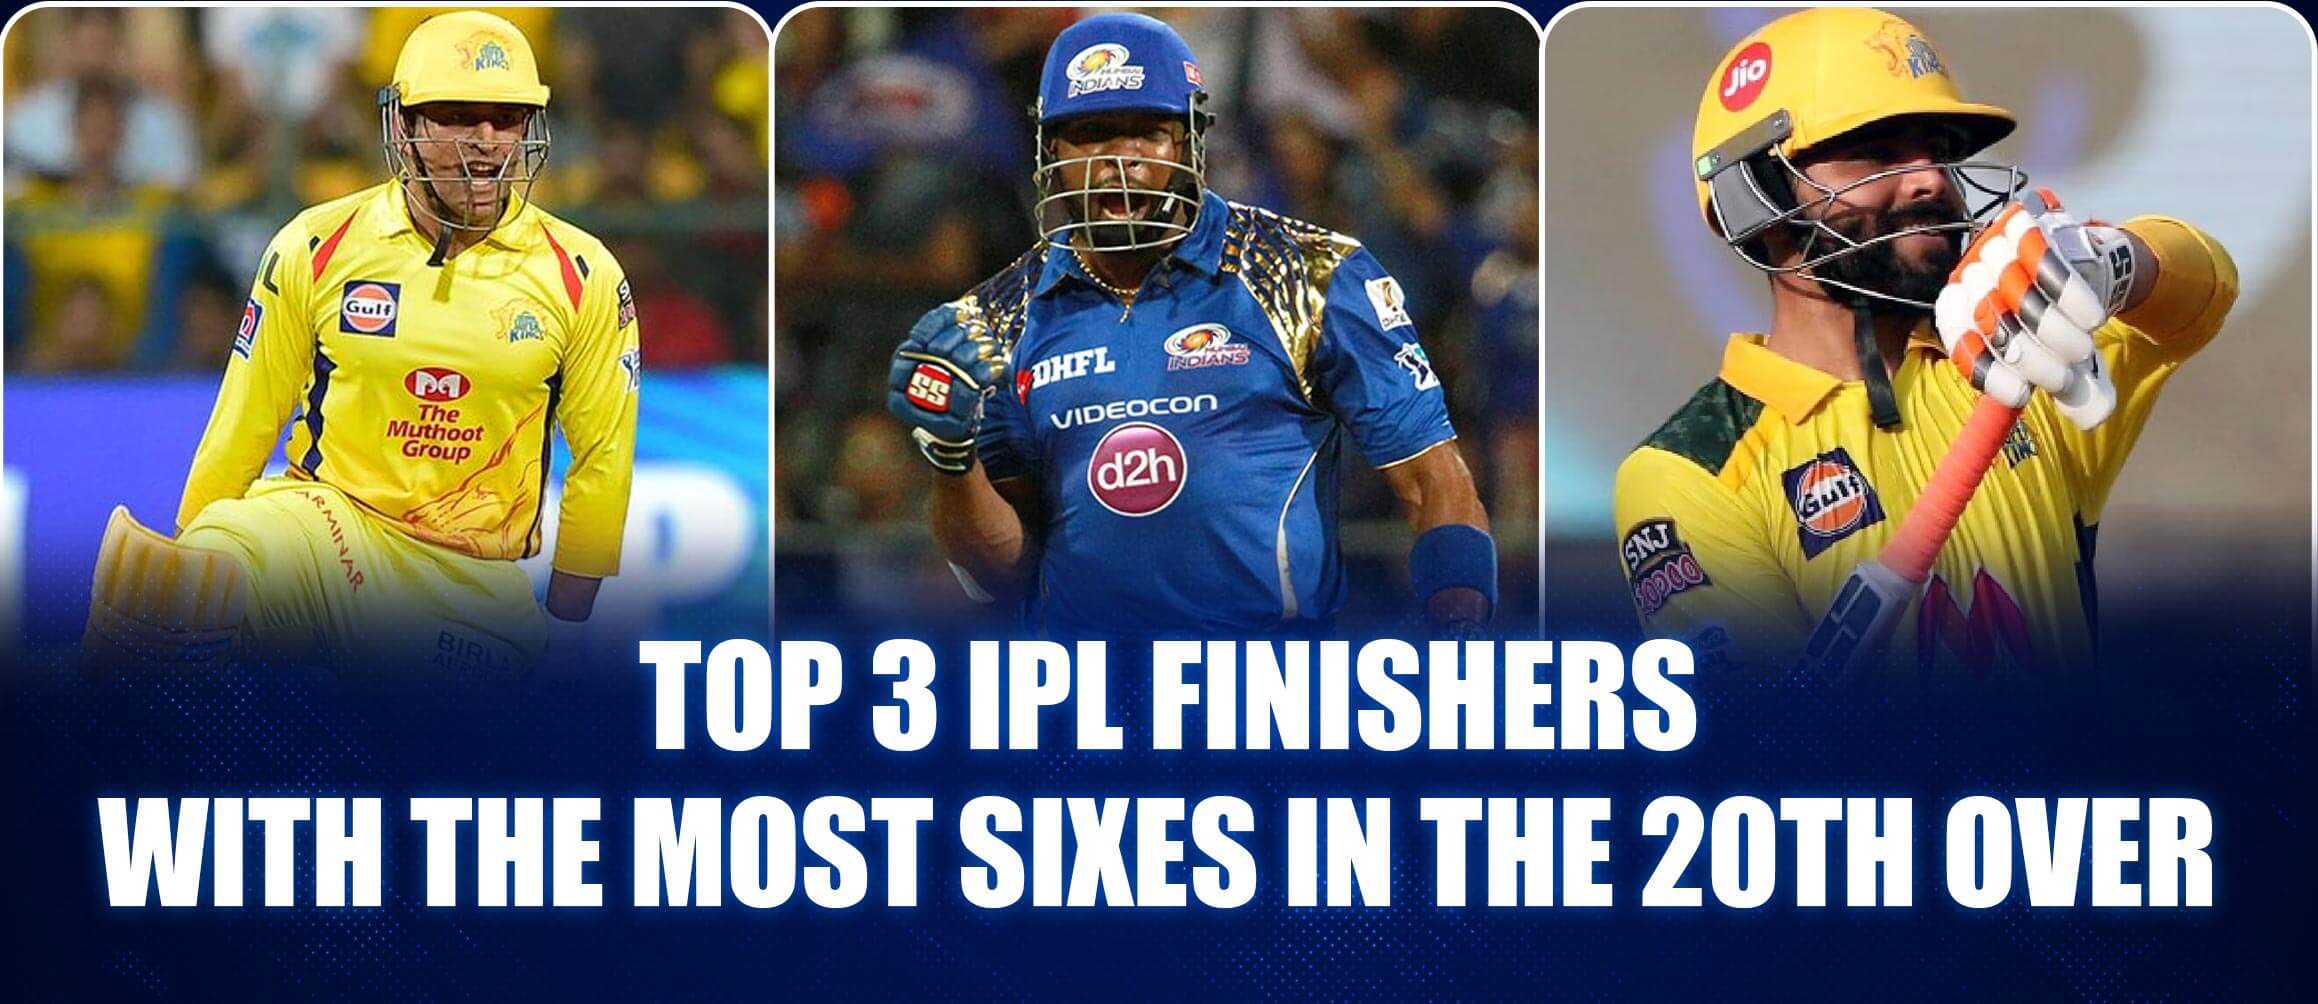 Top 3 IPL Finishers with the Most Sixes in the 20th Over